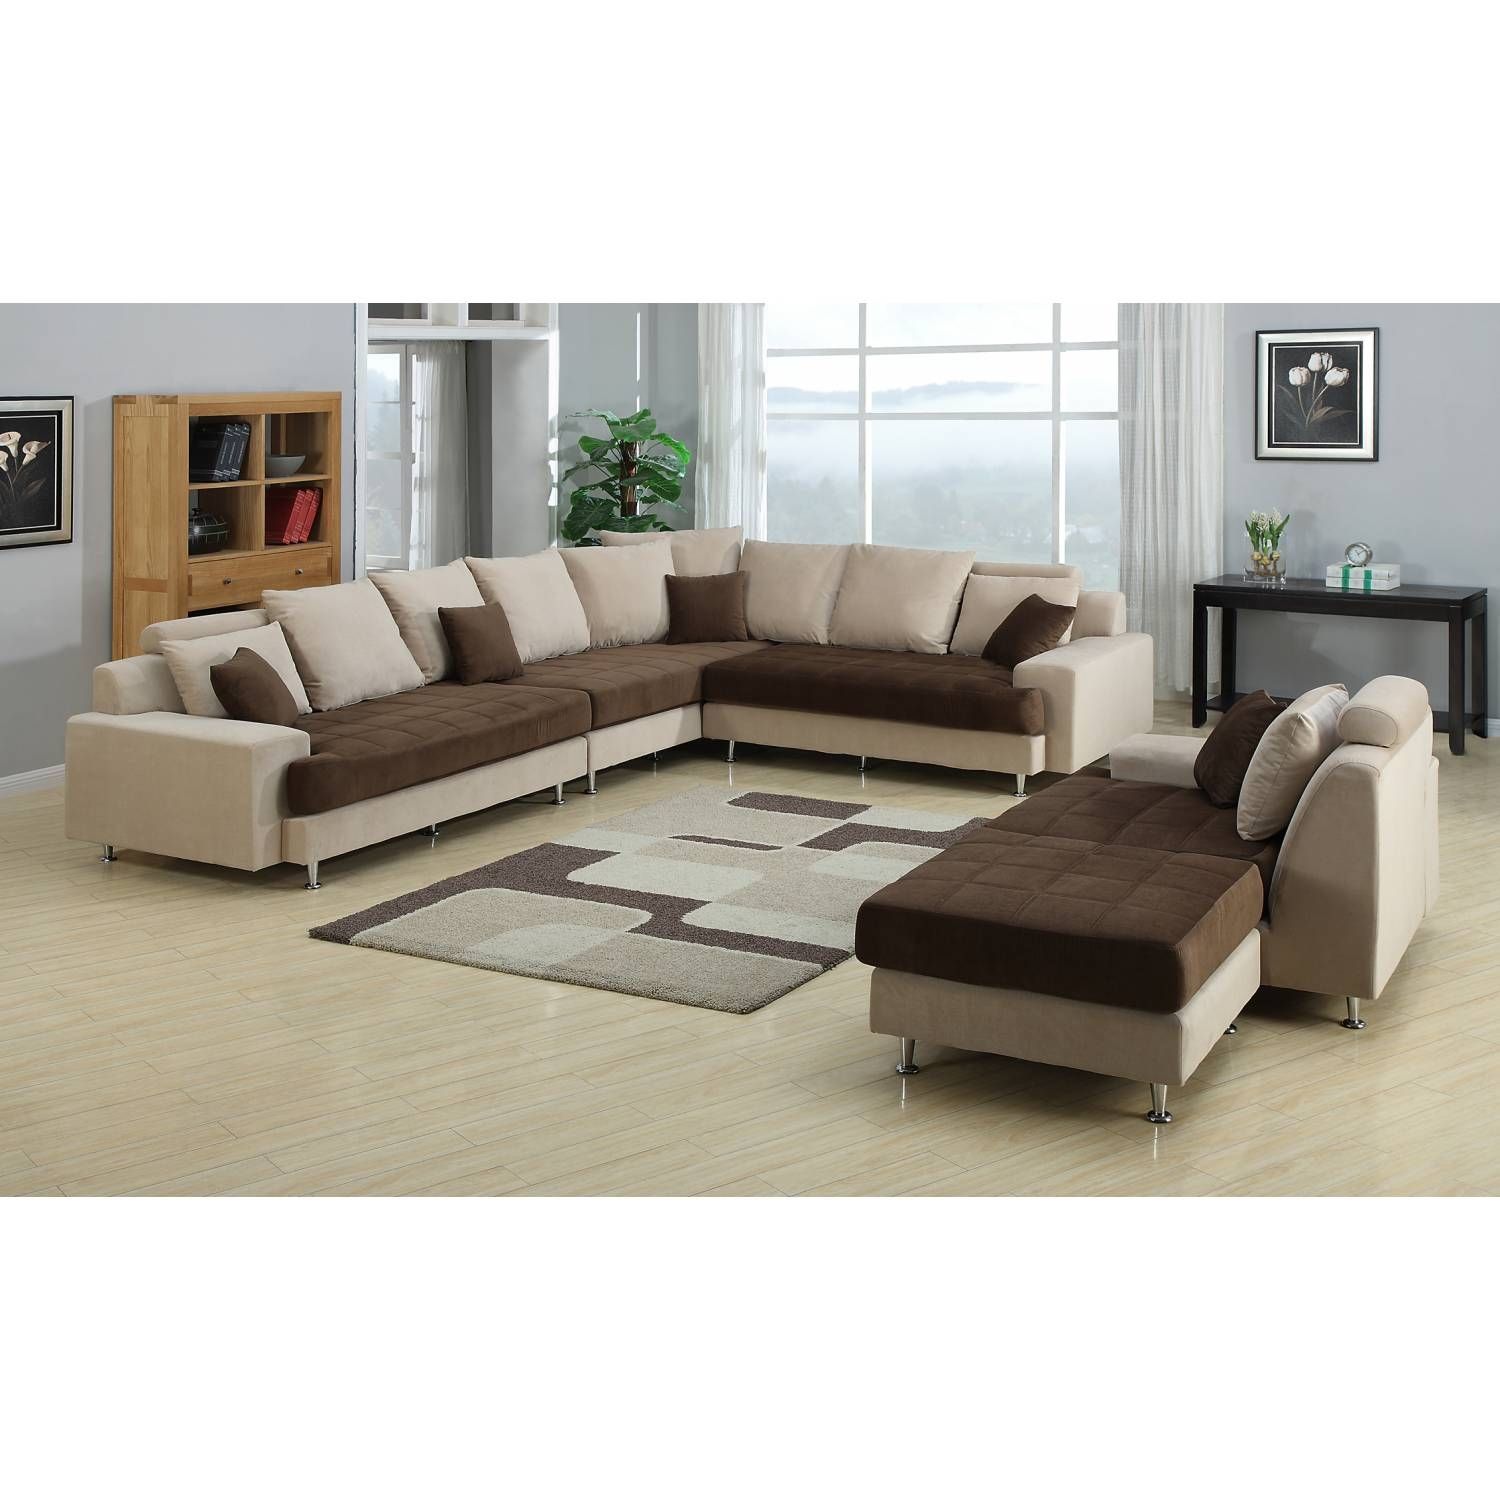 Sectional Sofa With Ottoman – Foter Throughout 2 Tone Chocolate Microfiber Sofas (View 13 of 15)